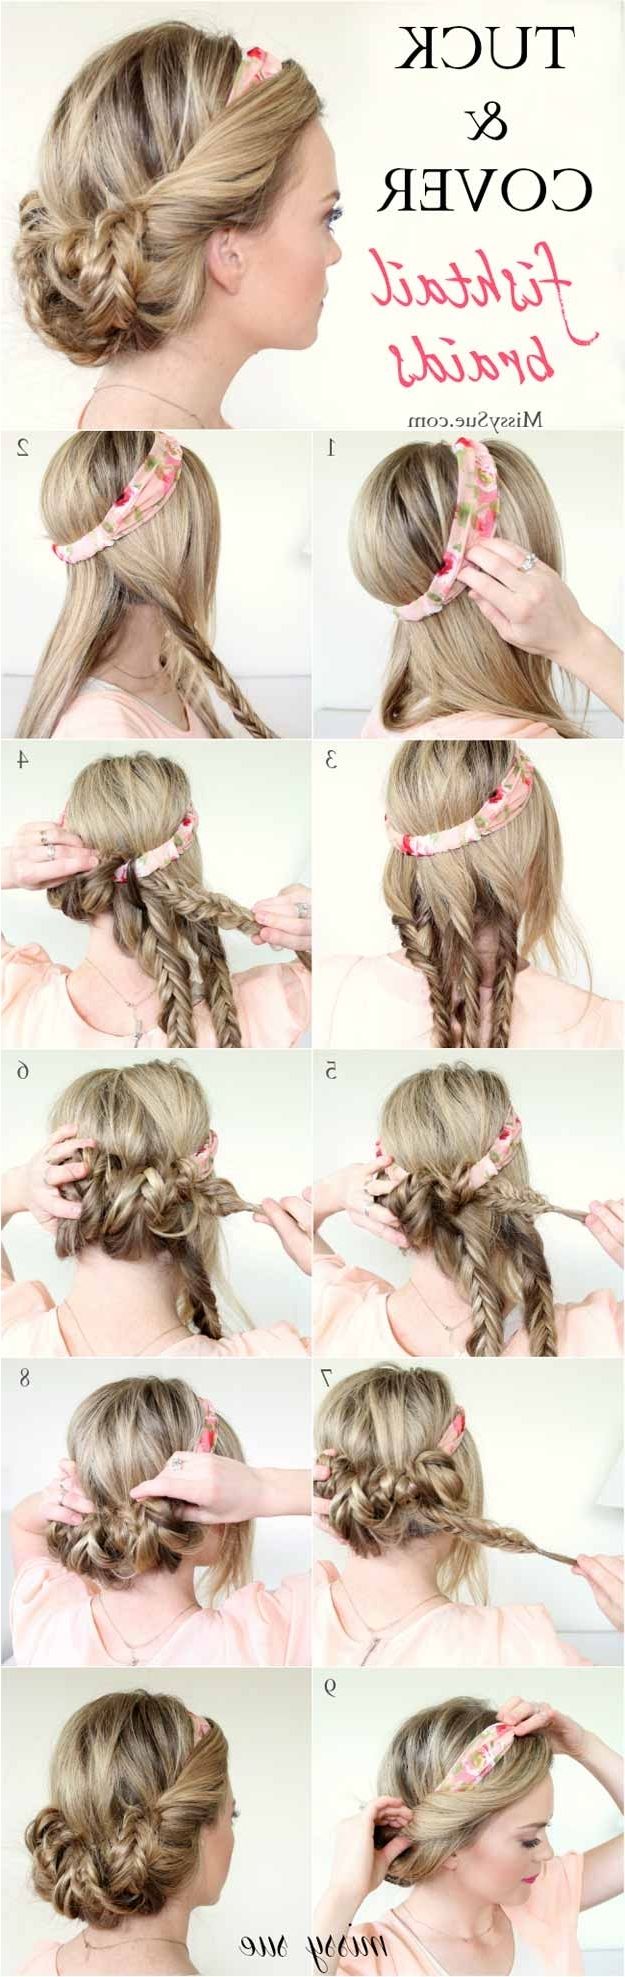 31 Wedding Hairstyles For Long Hair – The Goddess Regarding Most Recent Wedding Hairstyles For Long Hair With Headband (View 15 of 15)